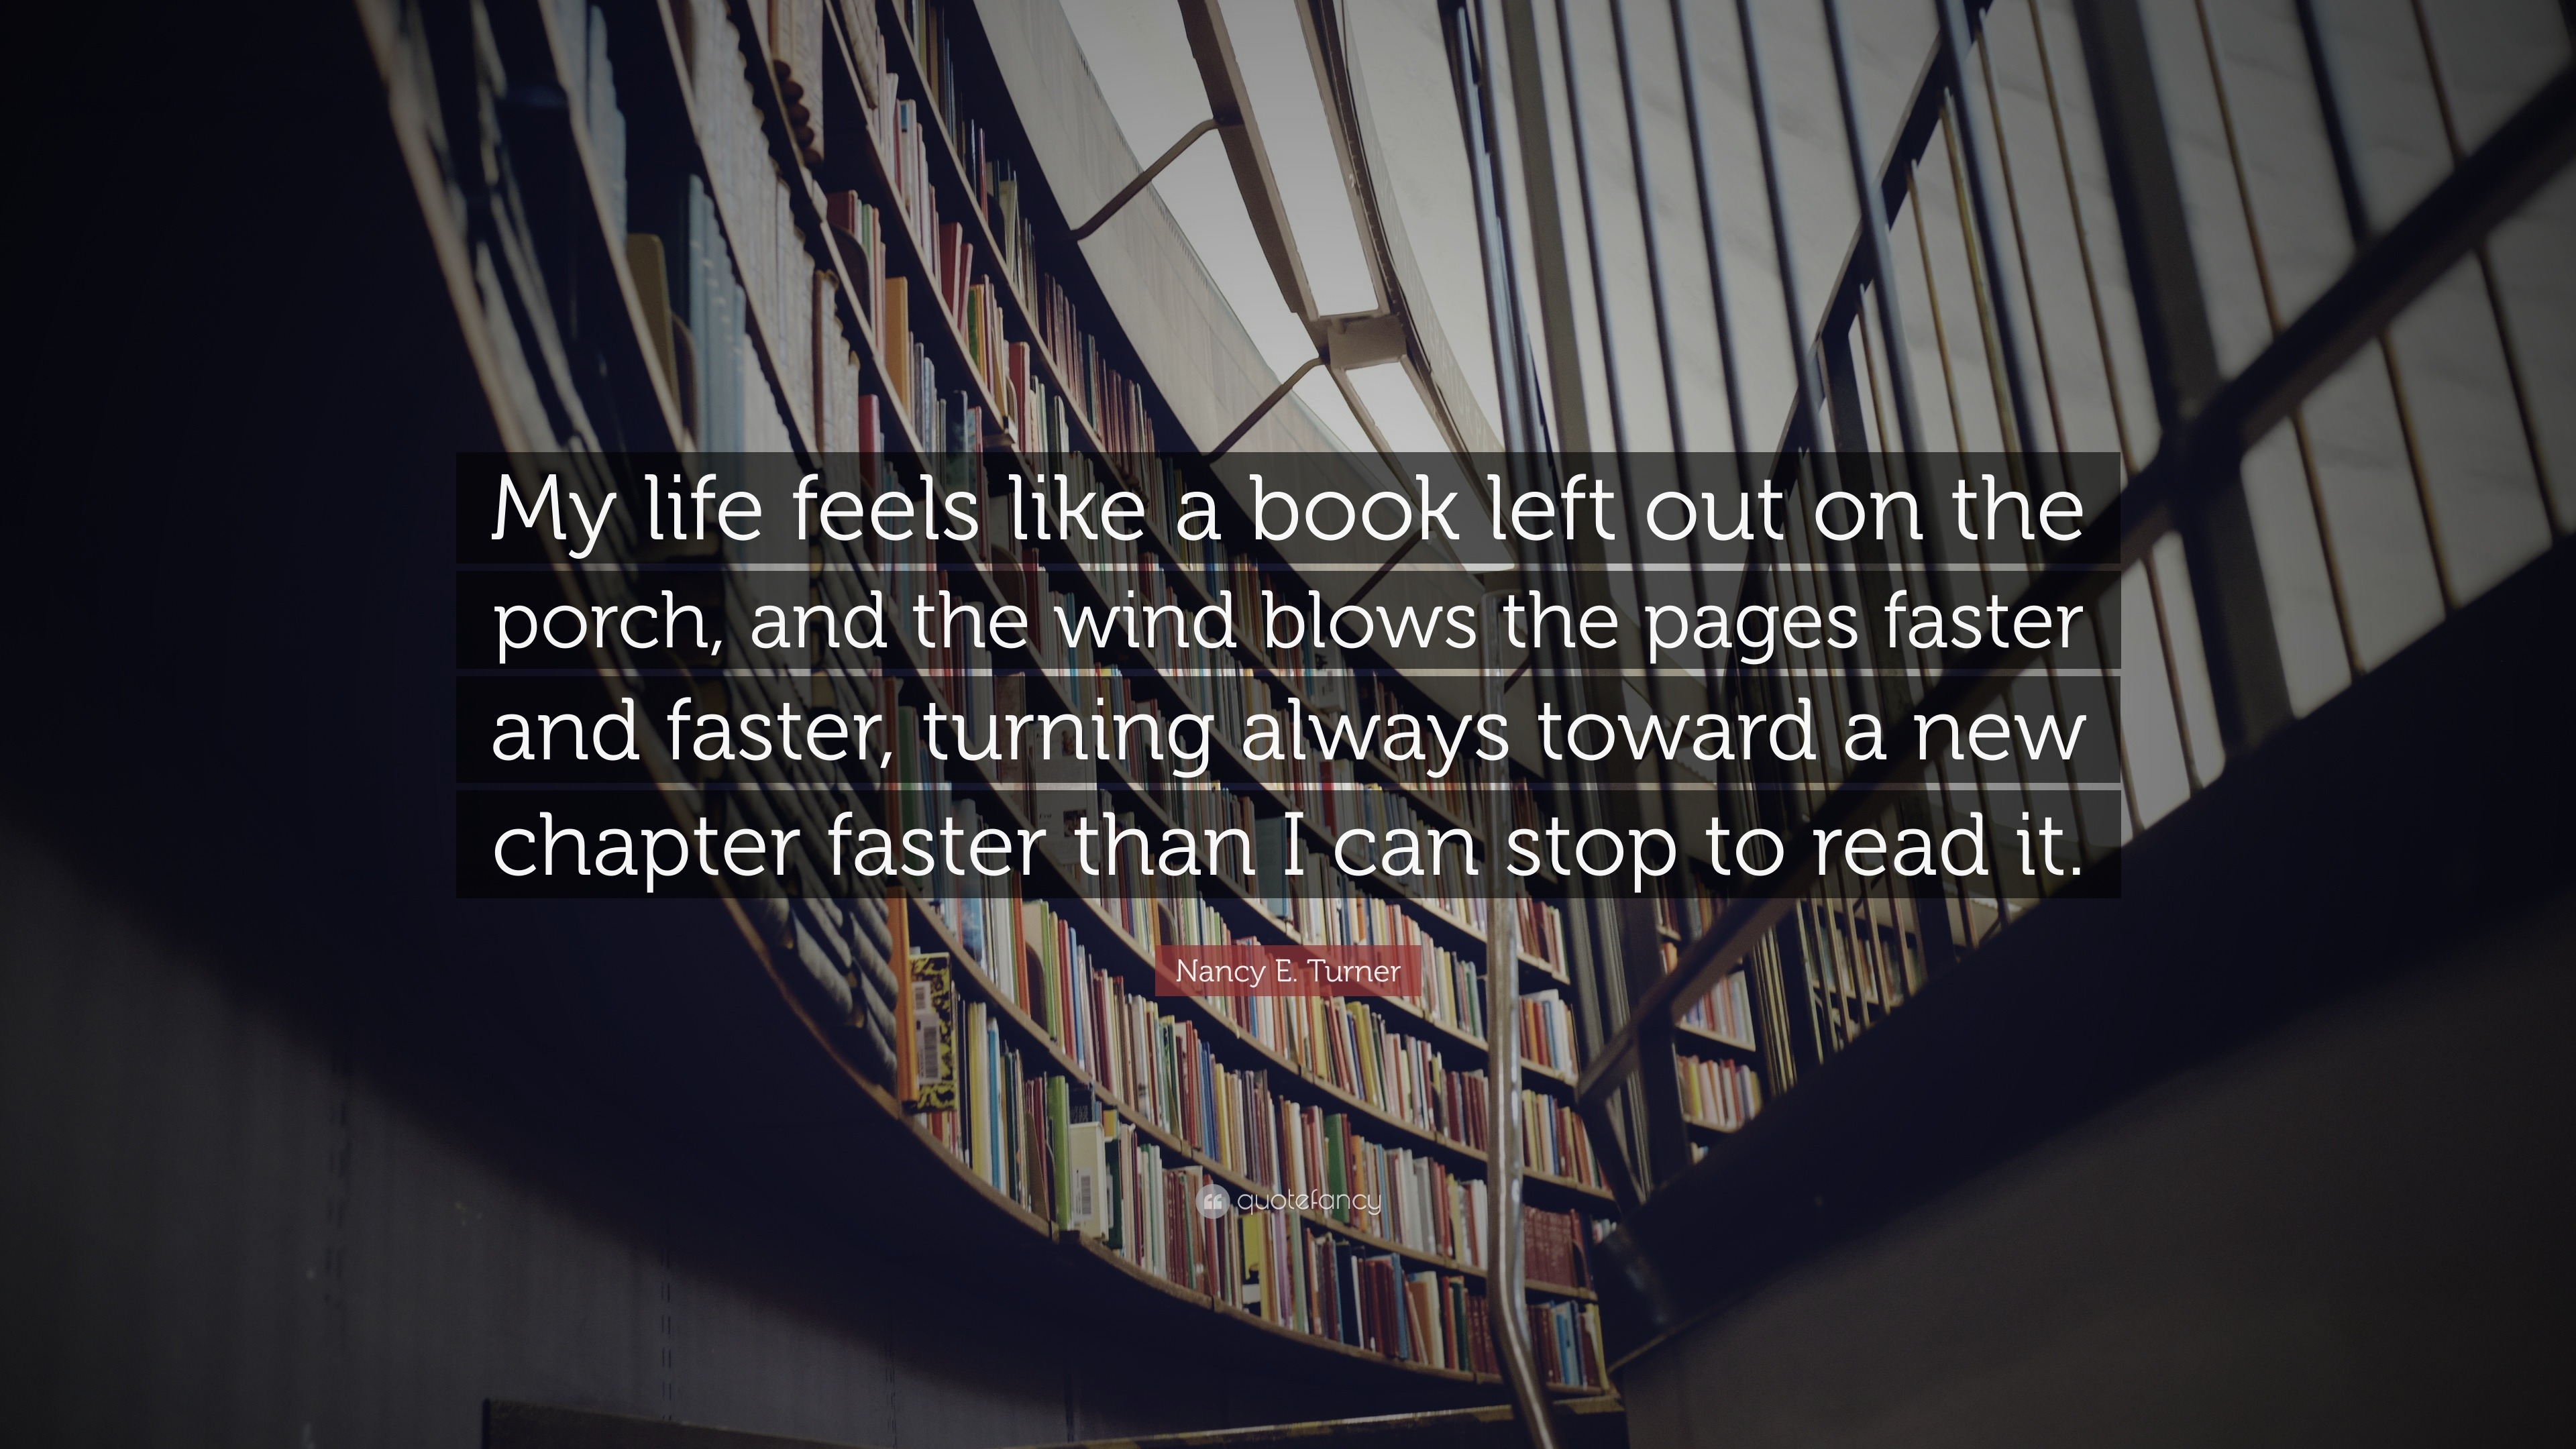 Nancy E Turner Quote “My life feels like a book left out on